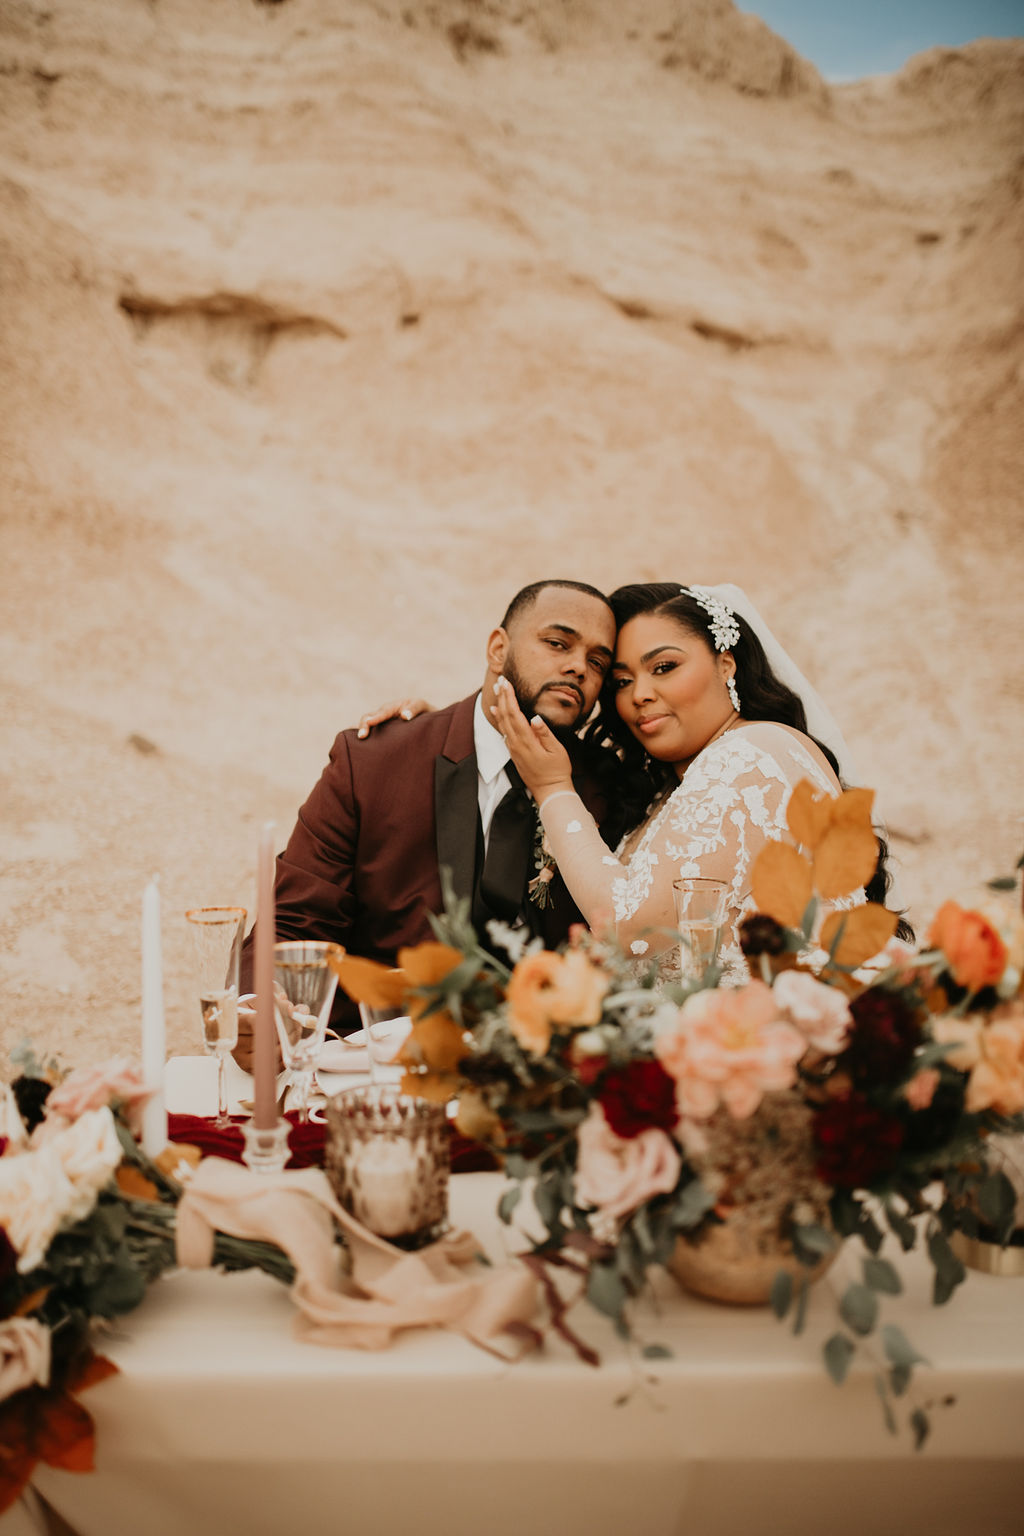 Newlyweds sitting behind their gold and burgundy sweetheart table. The bride and groom have their heads leaning against each other while the bride has her hand placed softly on the grooms face.